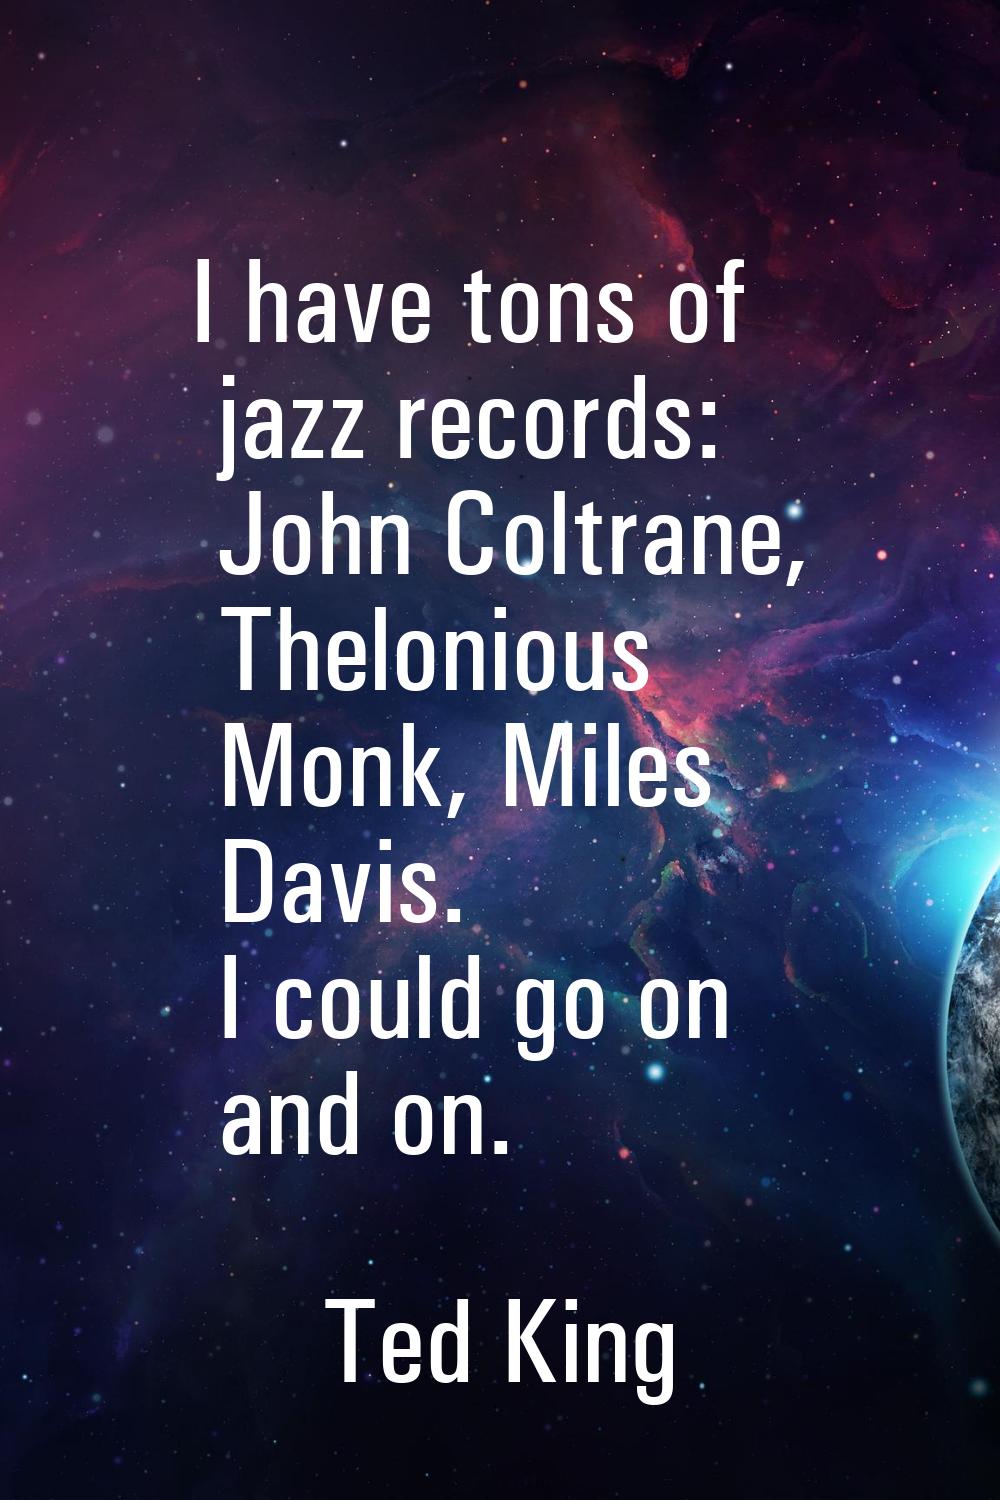 I have tons of jazz records: John Coltrane, Thelonious Monk, Miles Davis. I could go on and on.